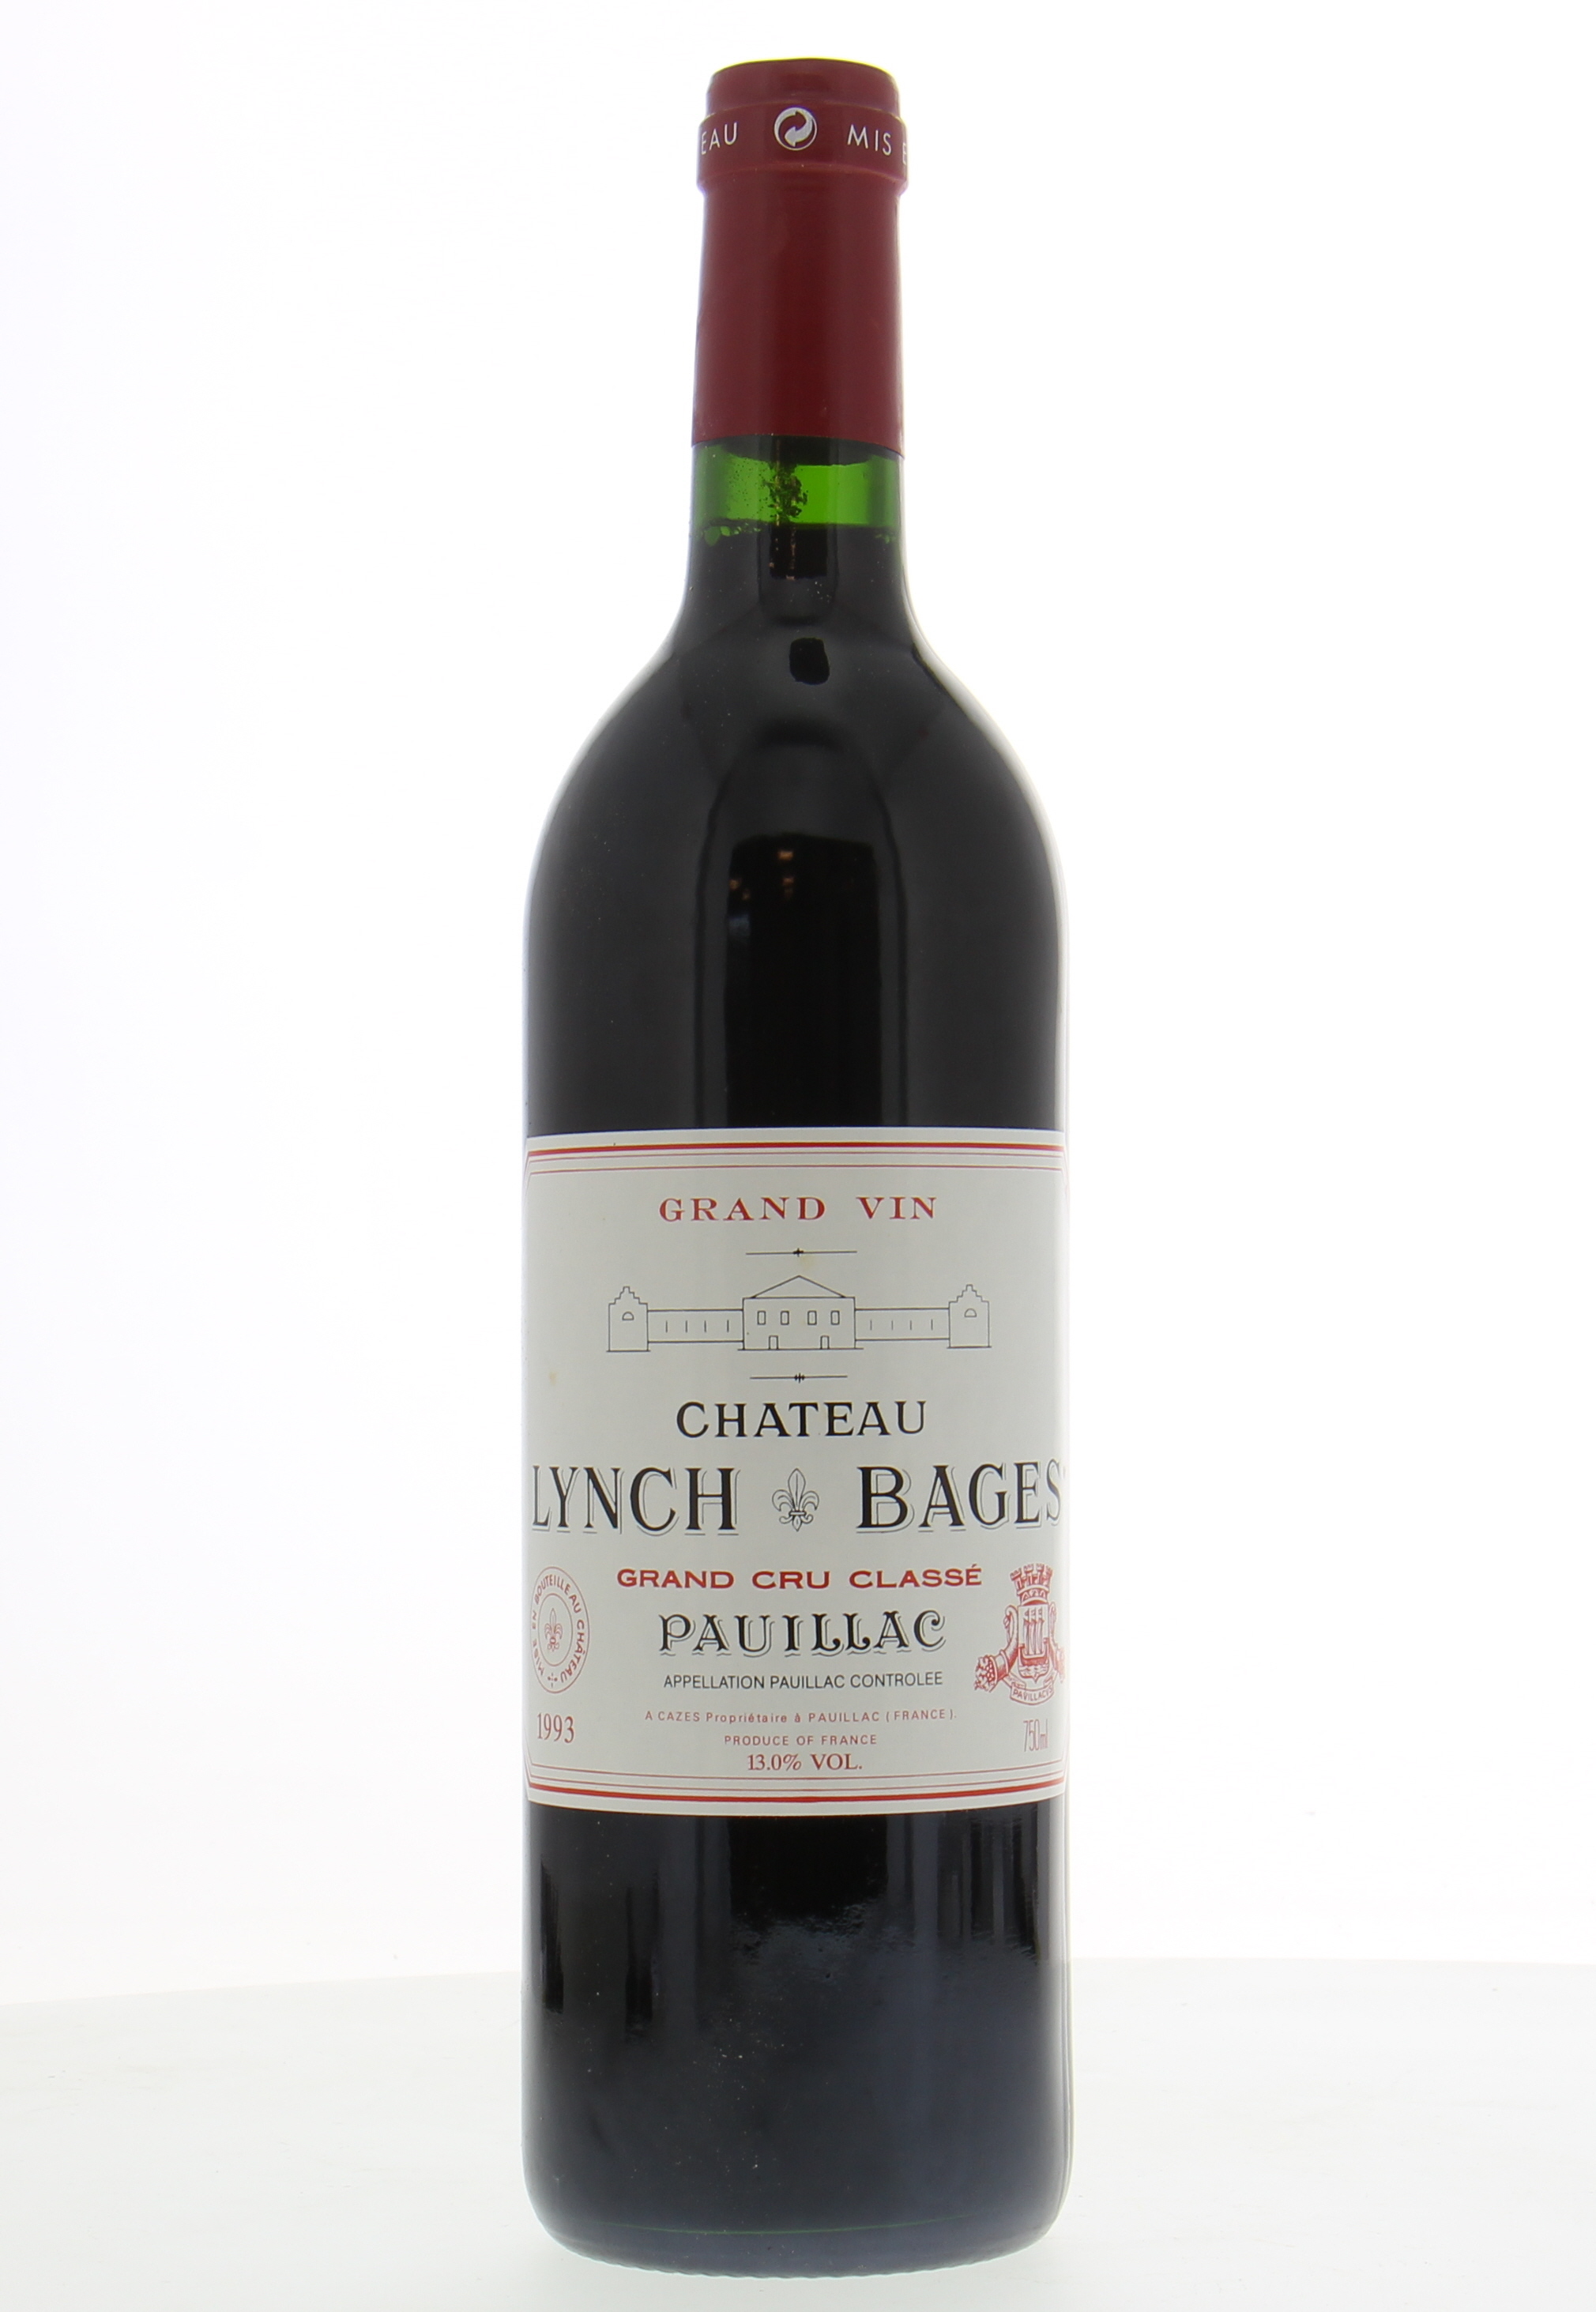 Chateau Lynch Bages - Chateau Lynch Bages 1993